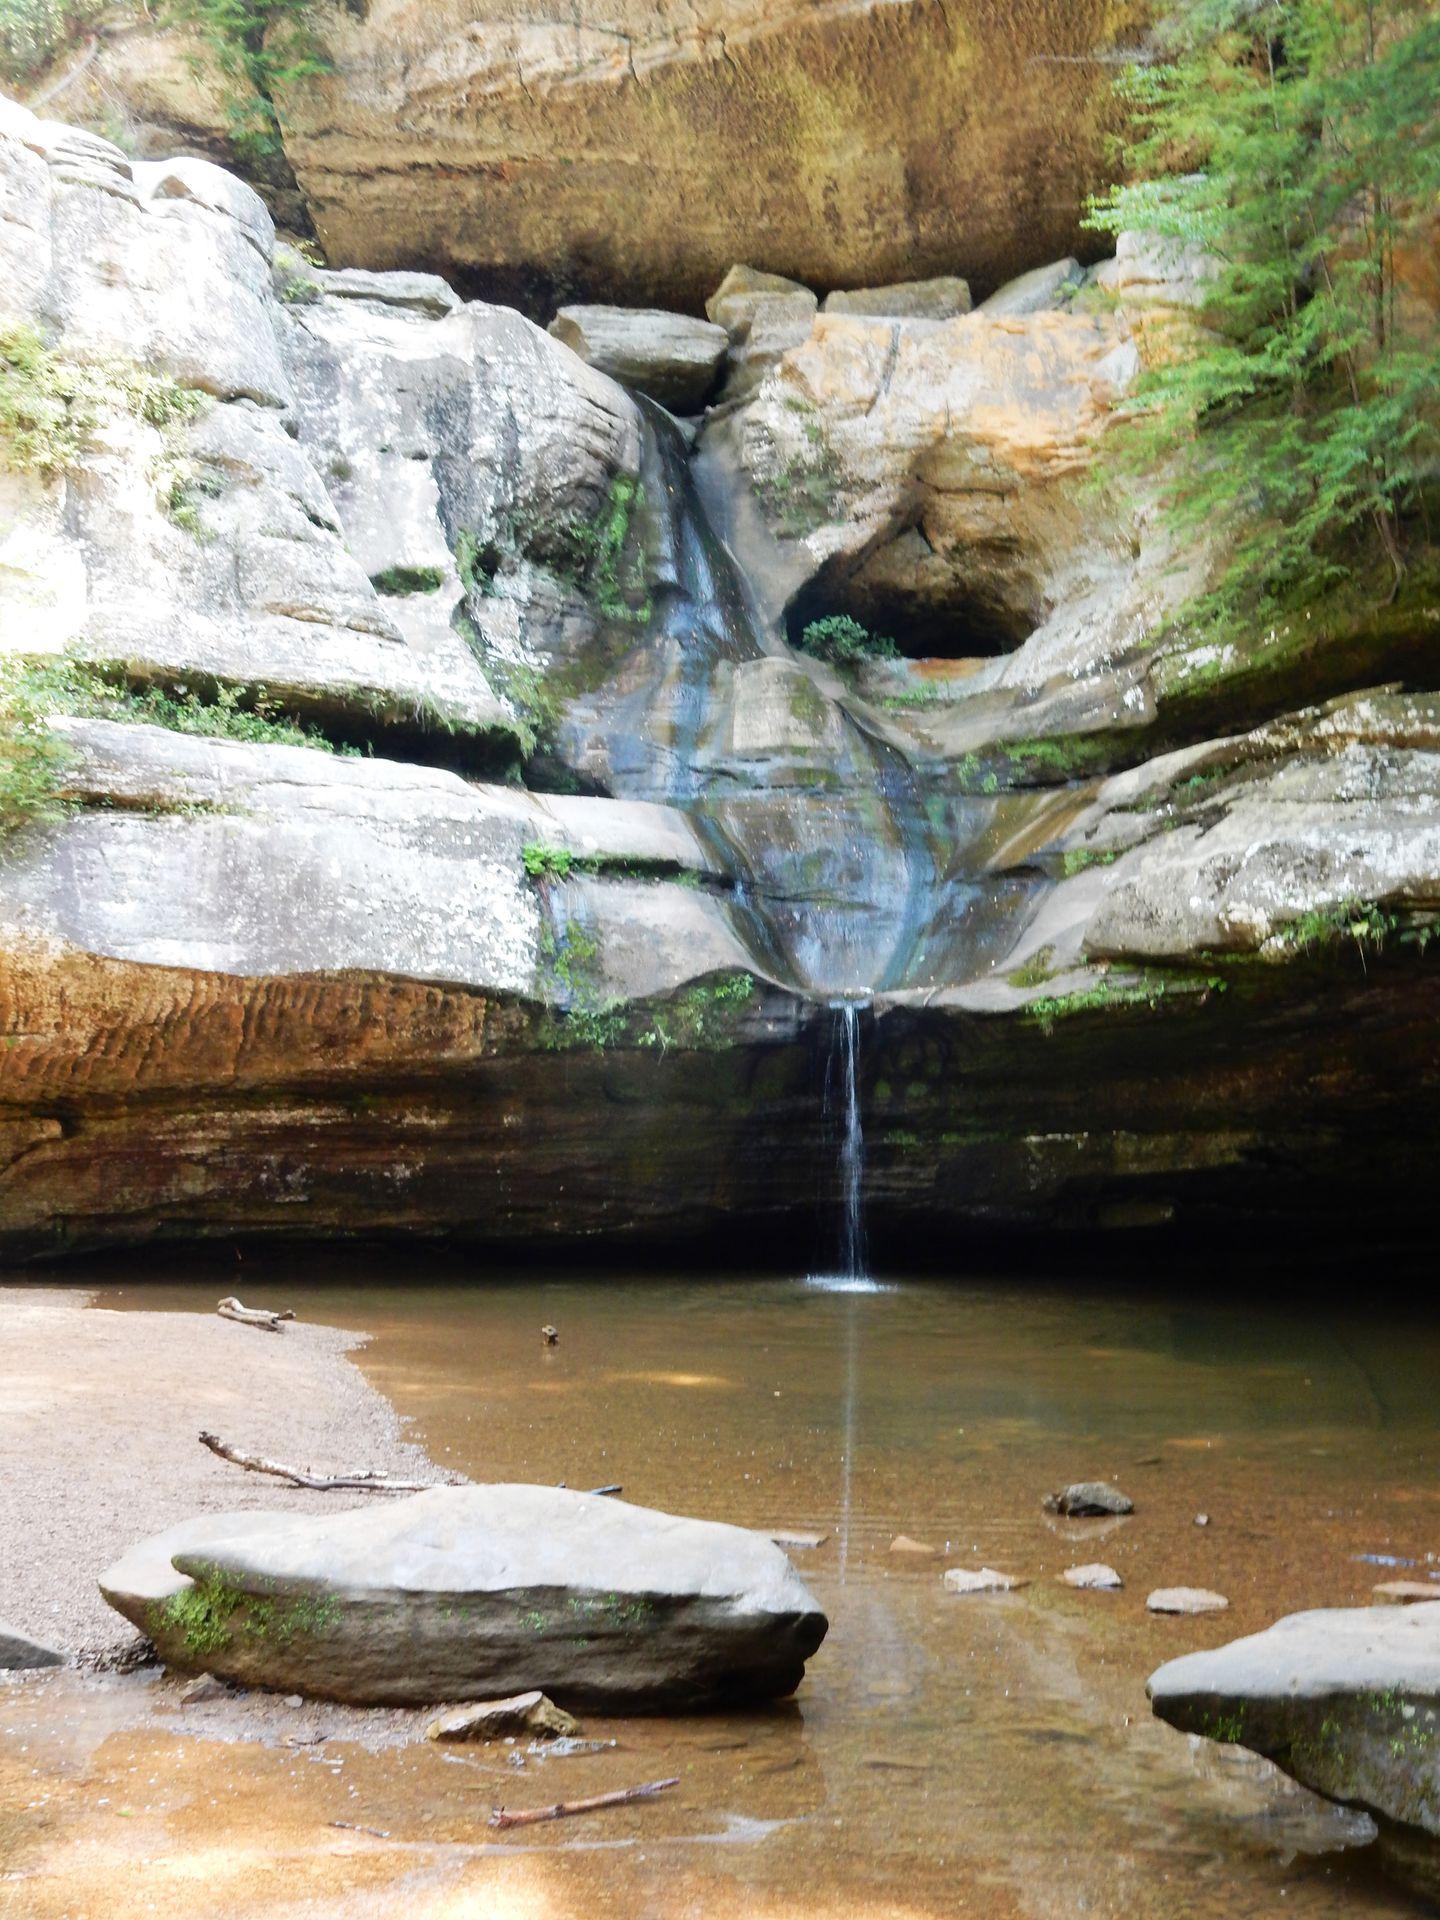 A view of Cedar Falls with a low water flow. Water trickles from a rock face into a pool of water.